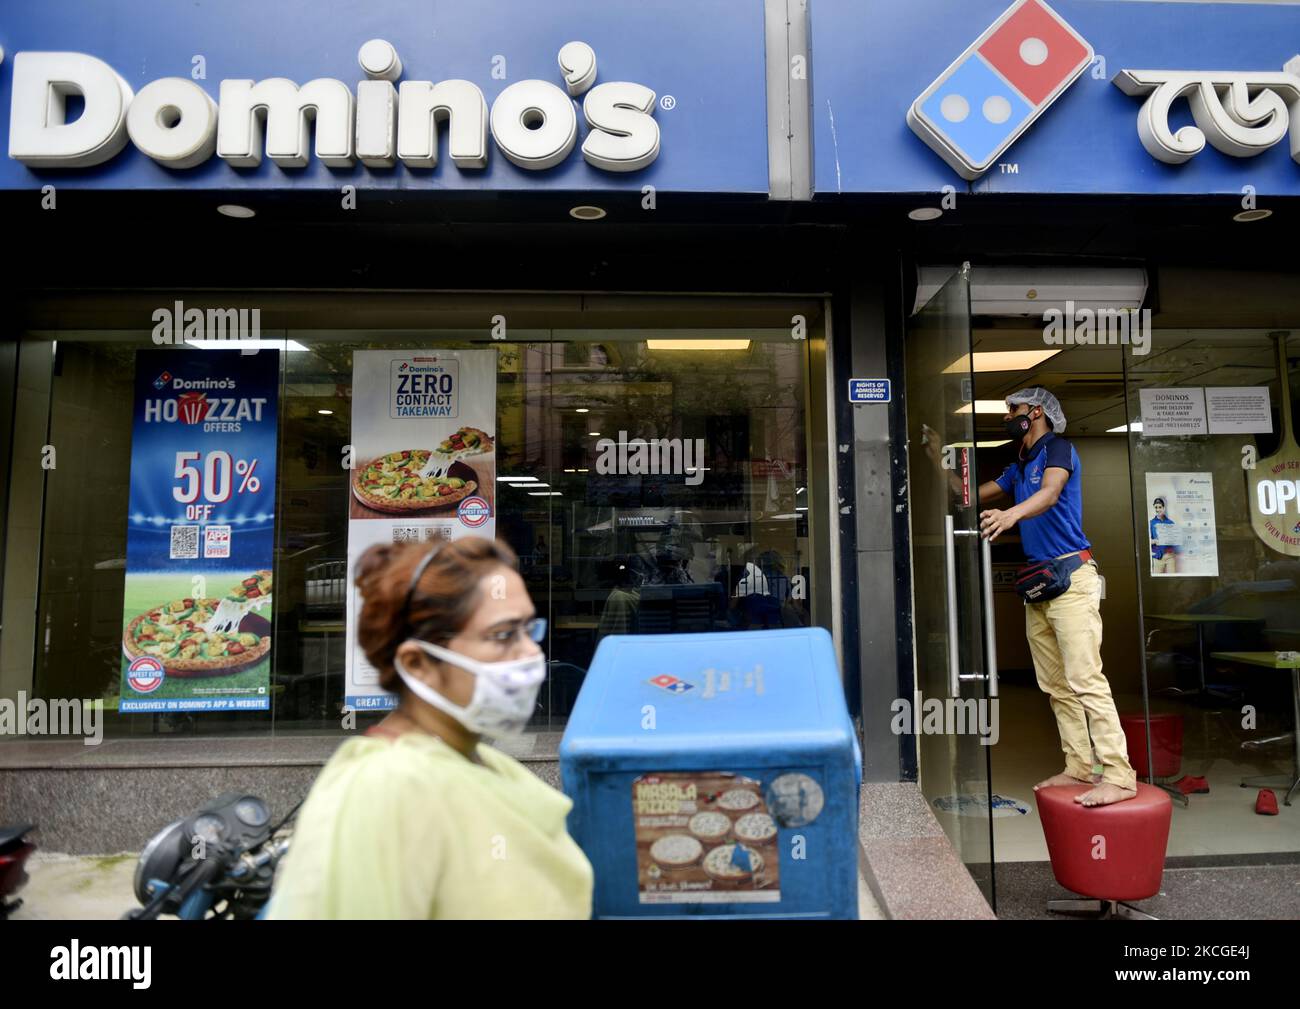 A cleaning staff of Dominos cleans a glass door before it opens for the day amid Coronavirus emergency in Kolkata, India, 24 June, 2021. (Photo by Indranil Aditya/NurPhoto) Stock Photo